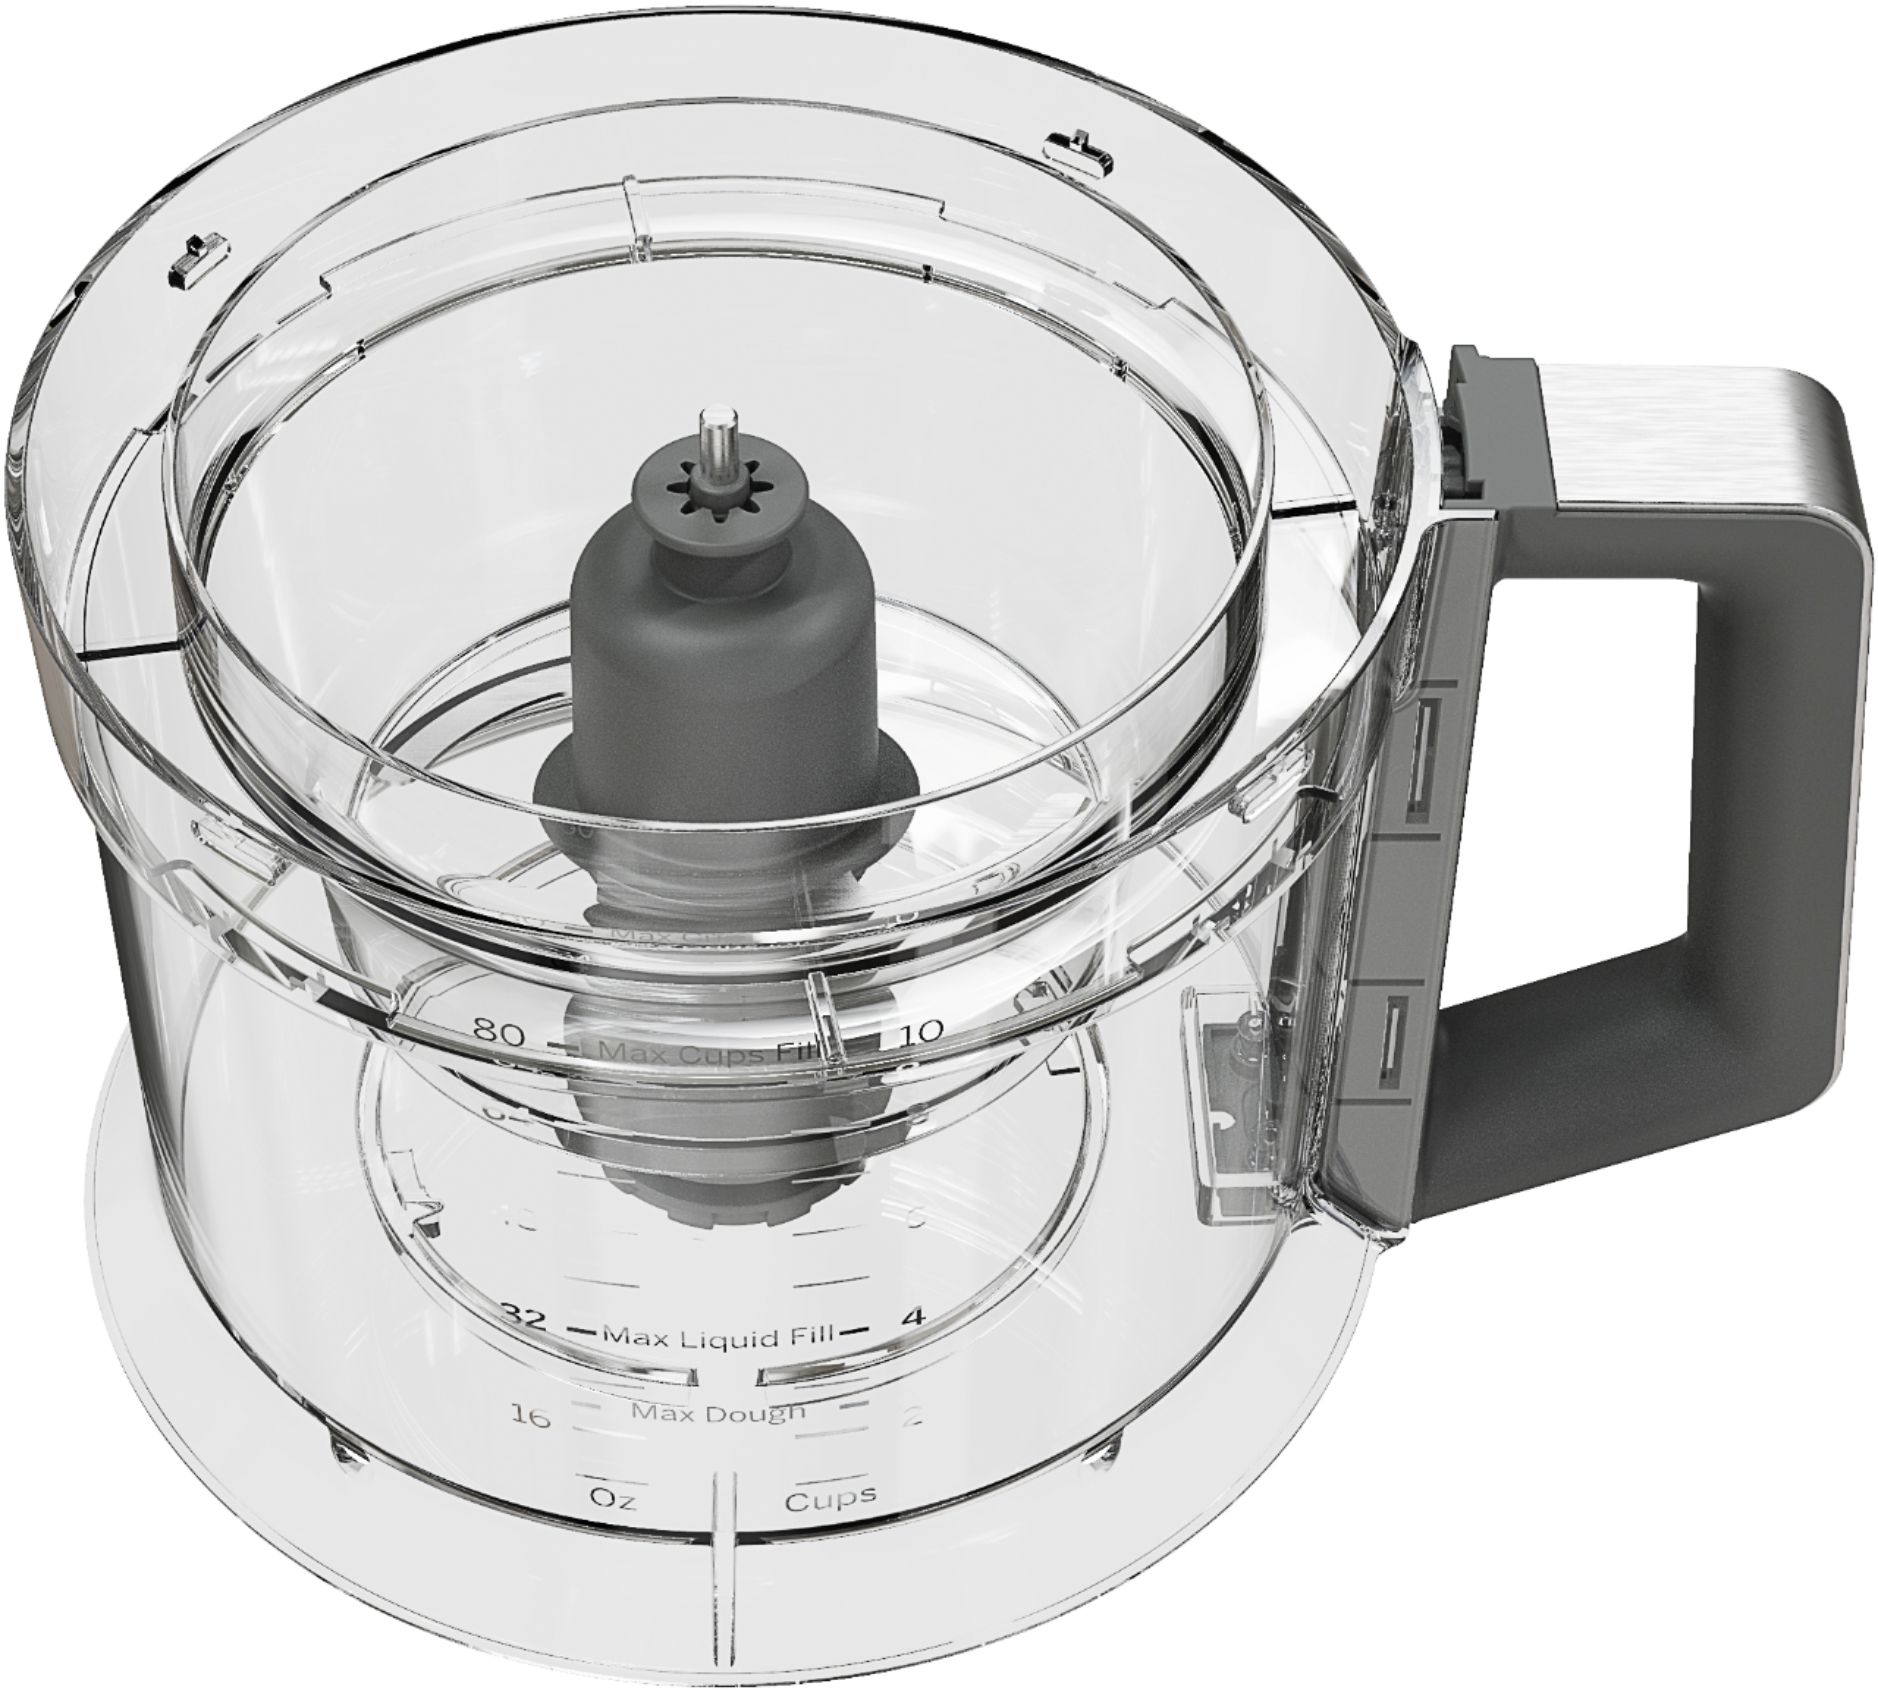 General Electric Food Processor and More